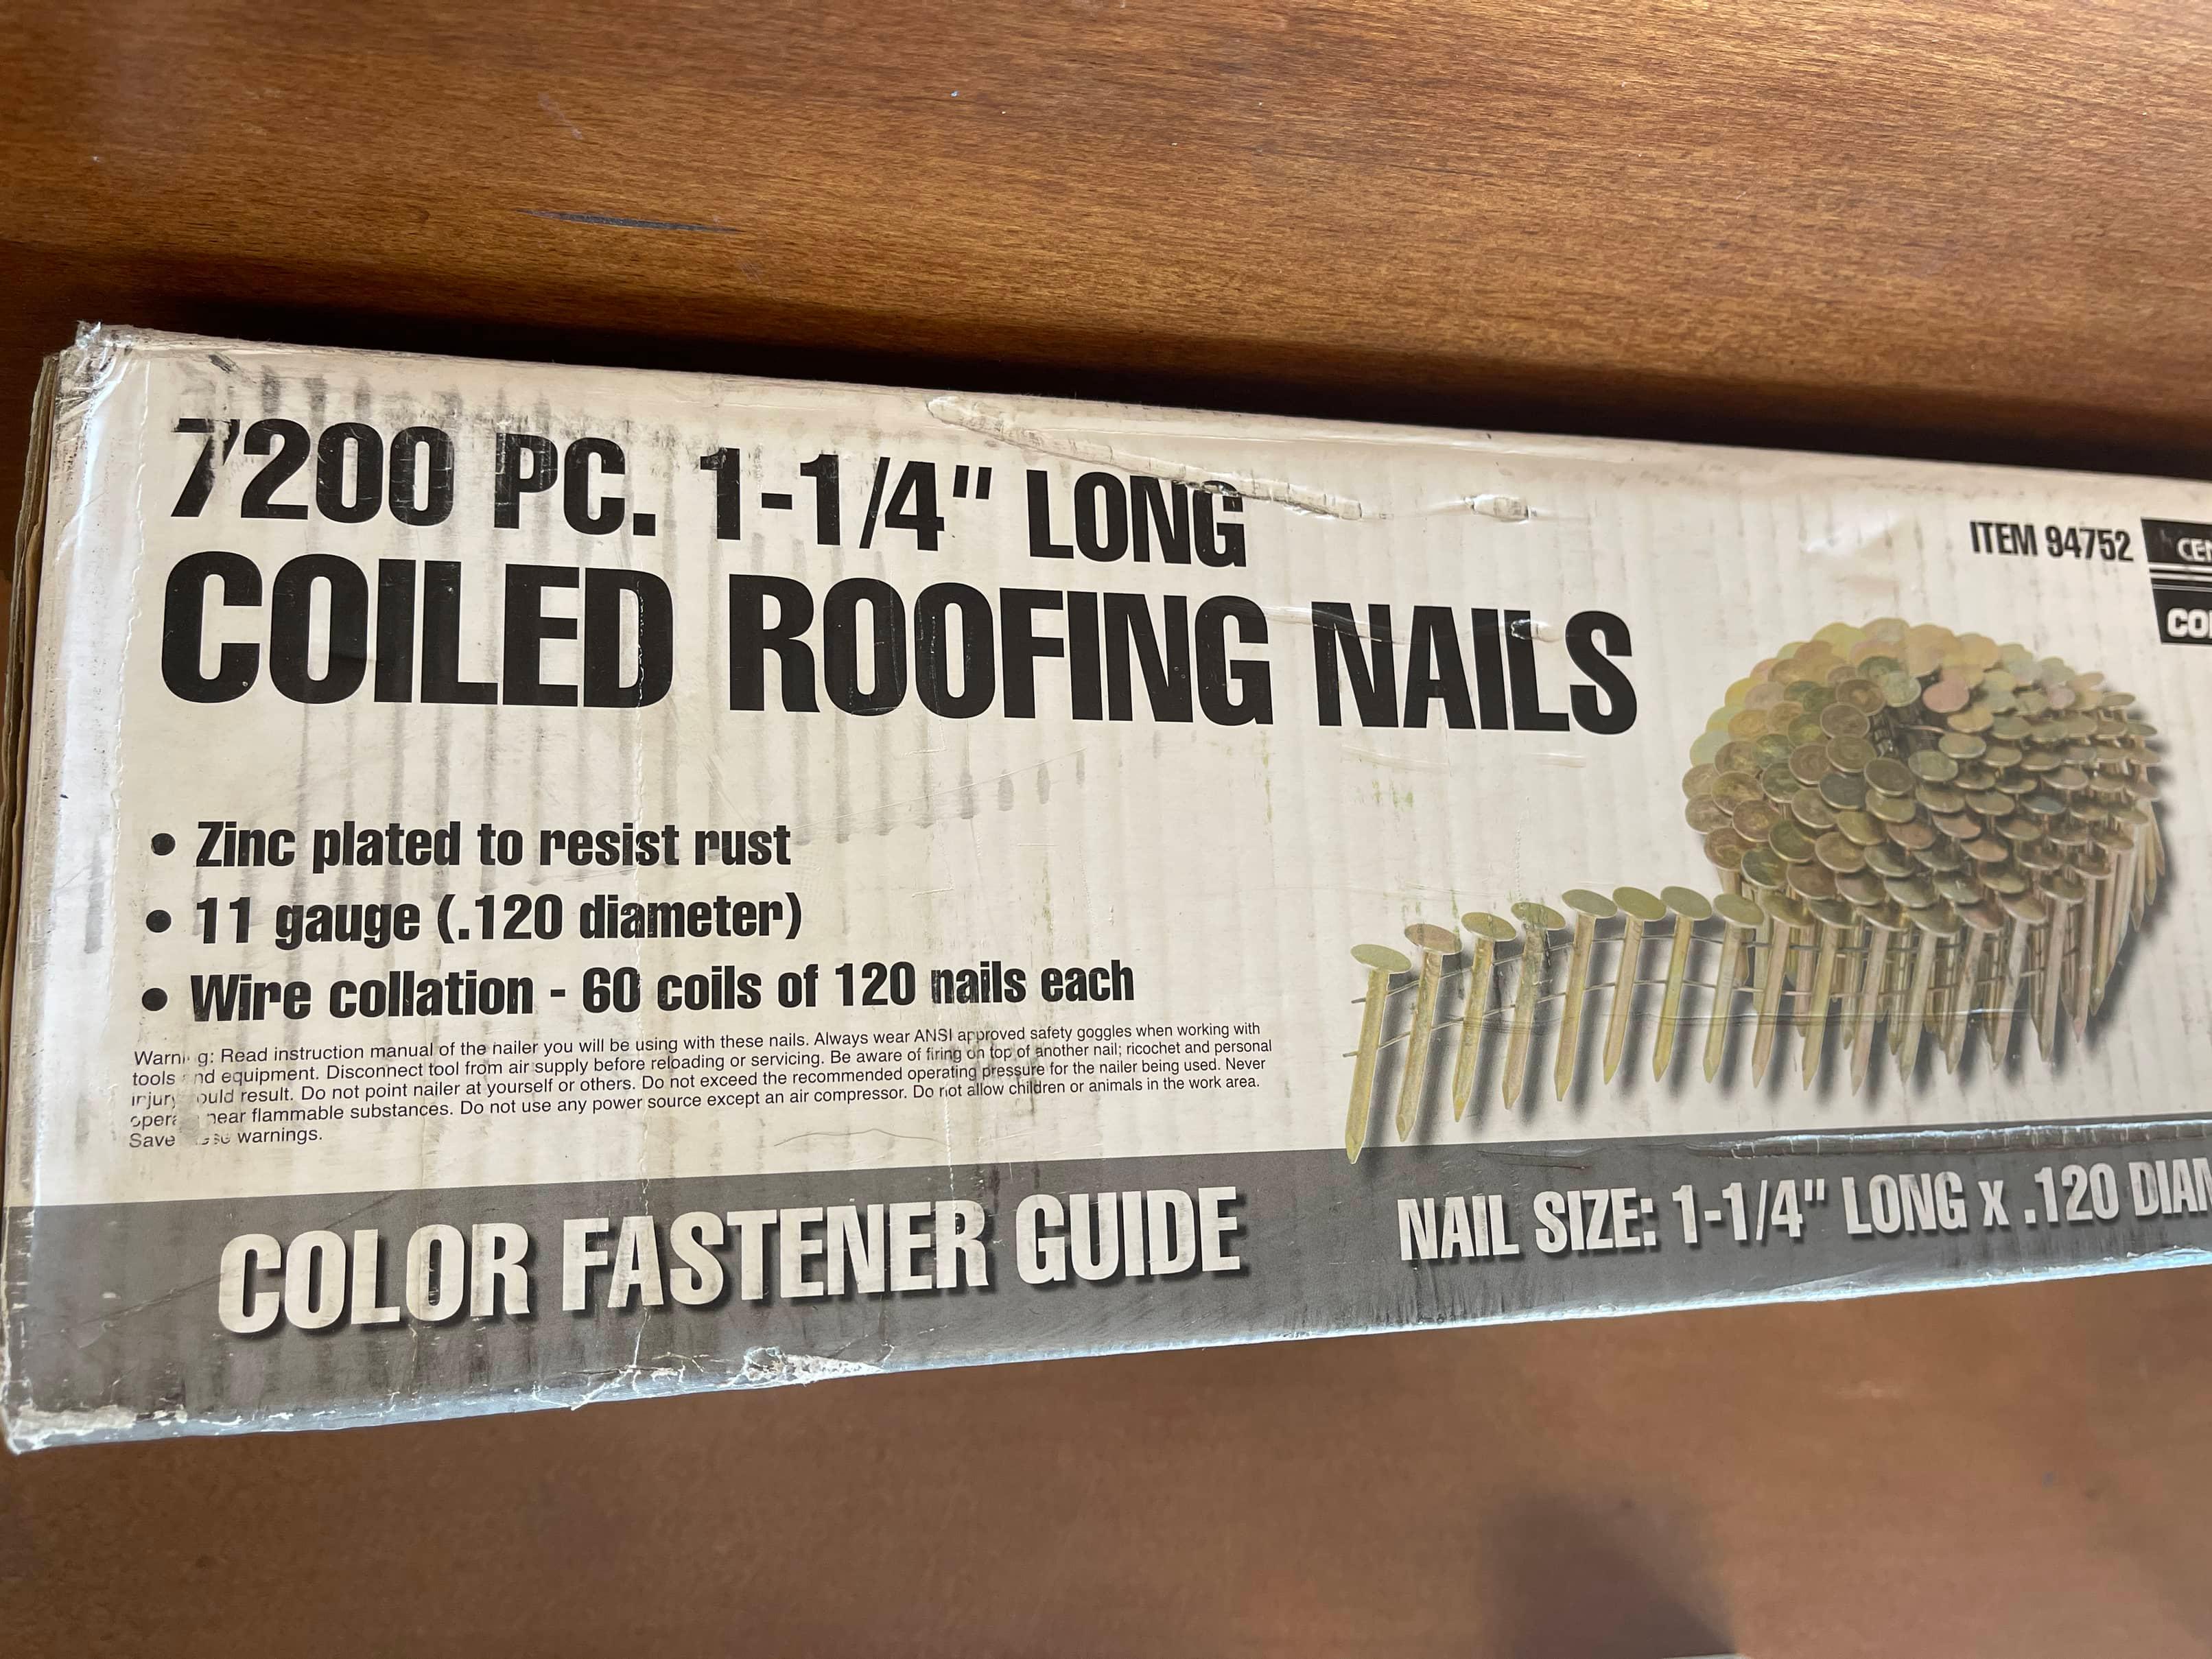 NEW Box of 7200 Piece 1-1/4" Long Coiled Roofing Nails Central Pneumatic Contractor Series Color Fas